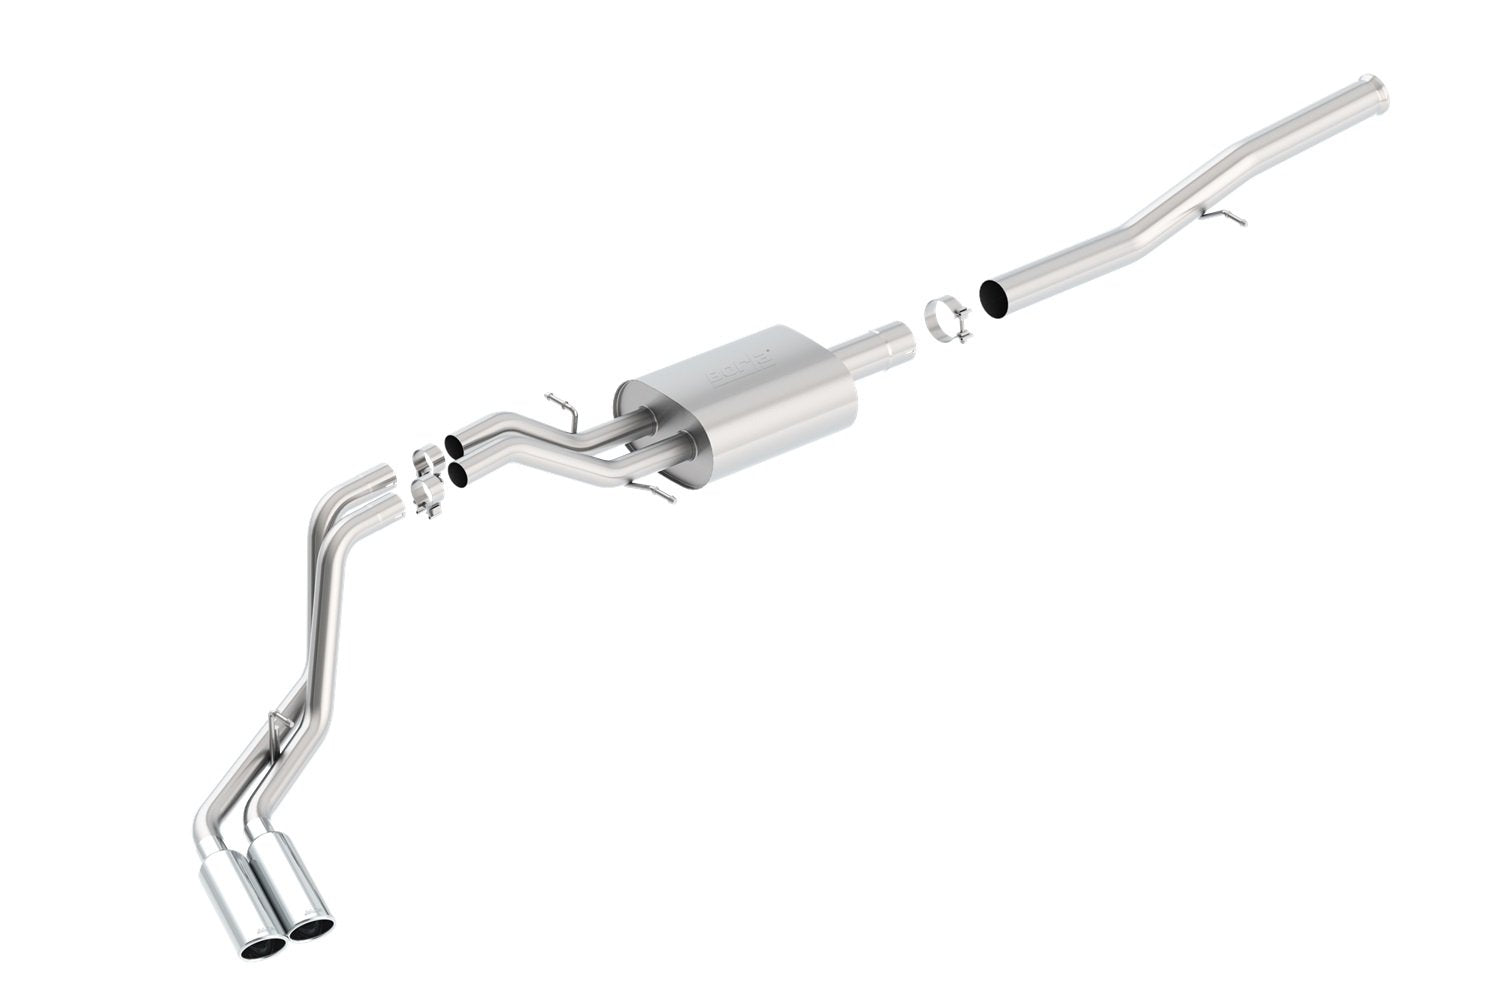 BORLA 140576 S-Type Cat-Back Exhaust System with Truck Side Exit for Chevrolet Silverado/GMC Sierra 1500